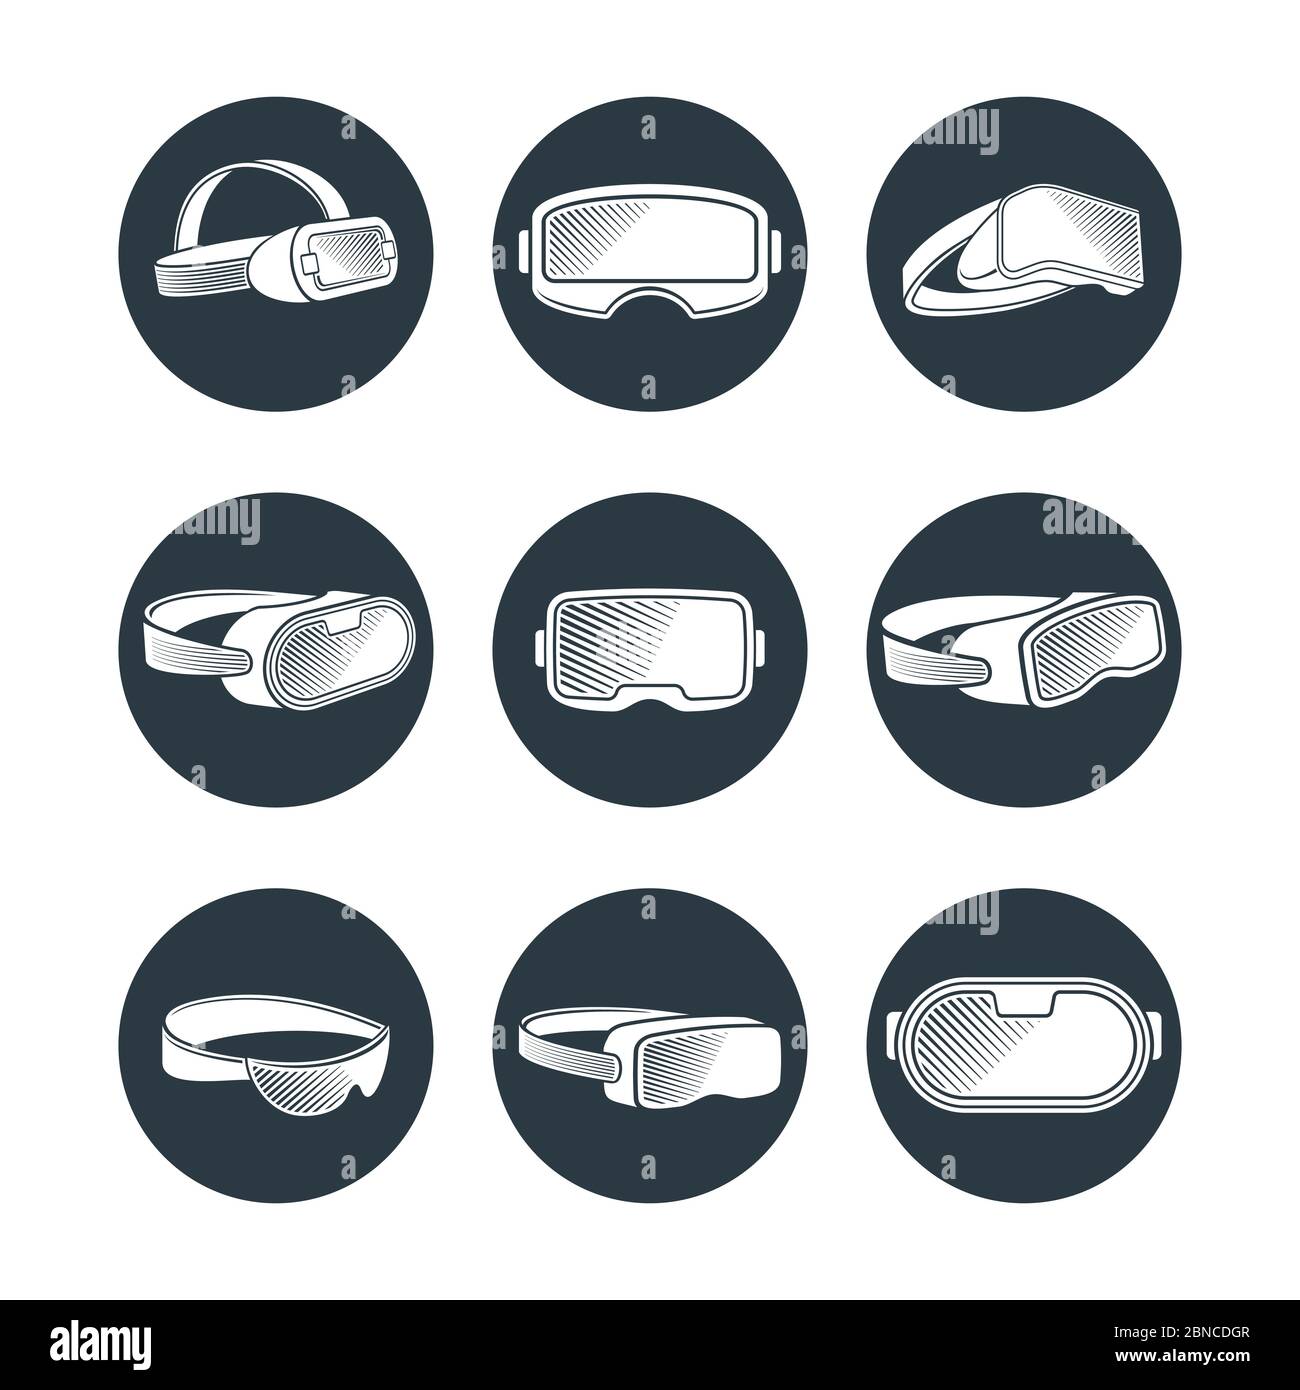 Virtual reality glasses and helmets vector icons set. Illustration of vr device, virtual helmet for cyberspace game Stock Vector